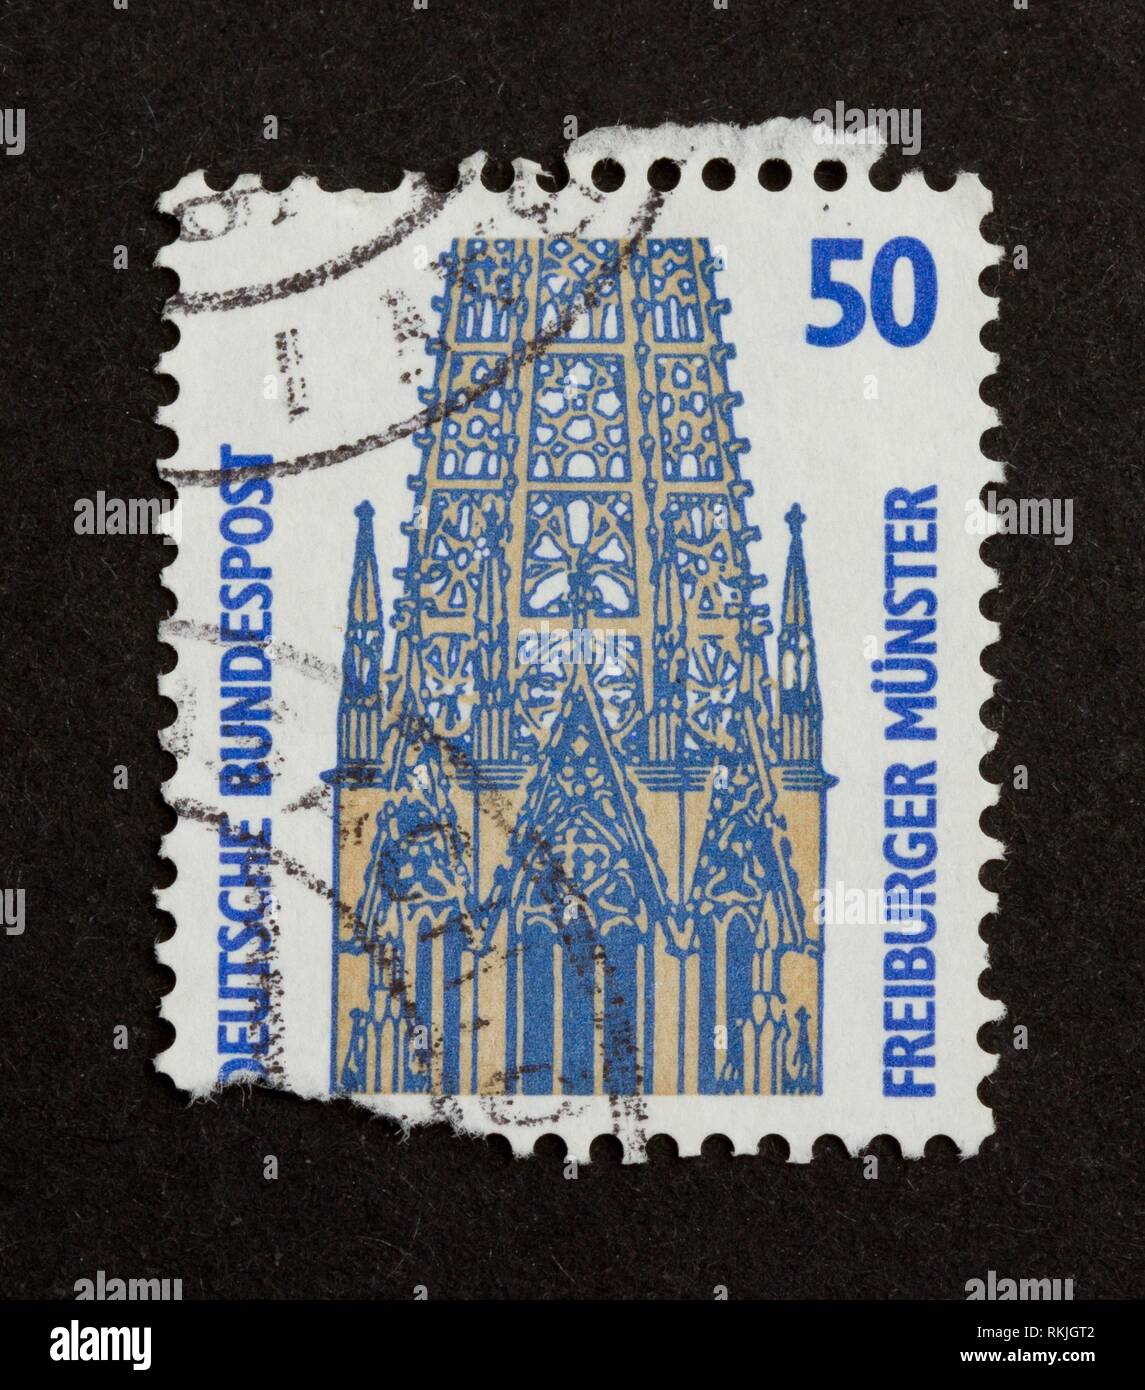 GERMANY - CIRCA 1980: Stamp printed in Germany shows the Freiburger Münster, circa 1980. Stock Photo